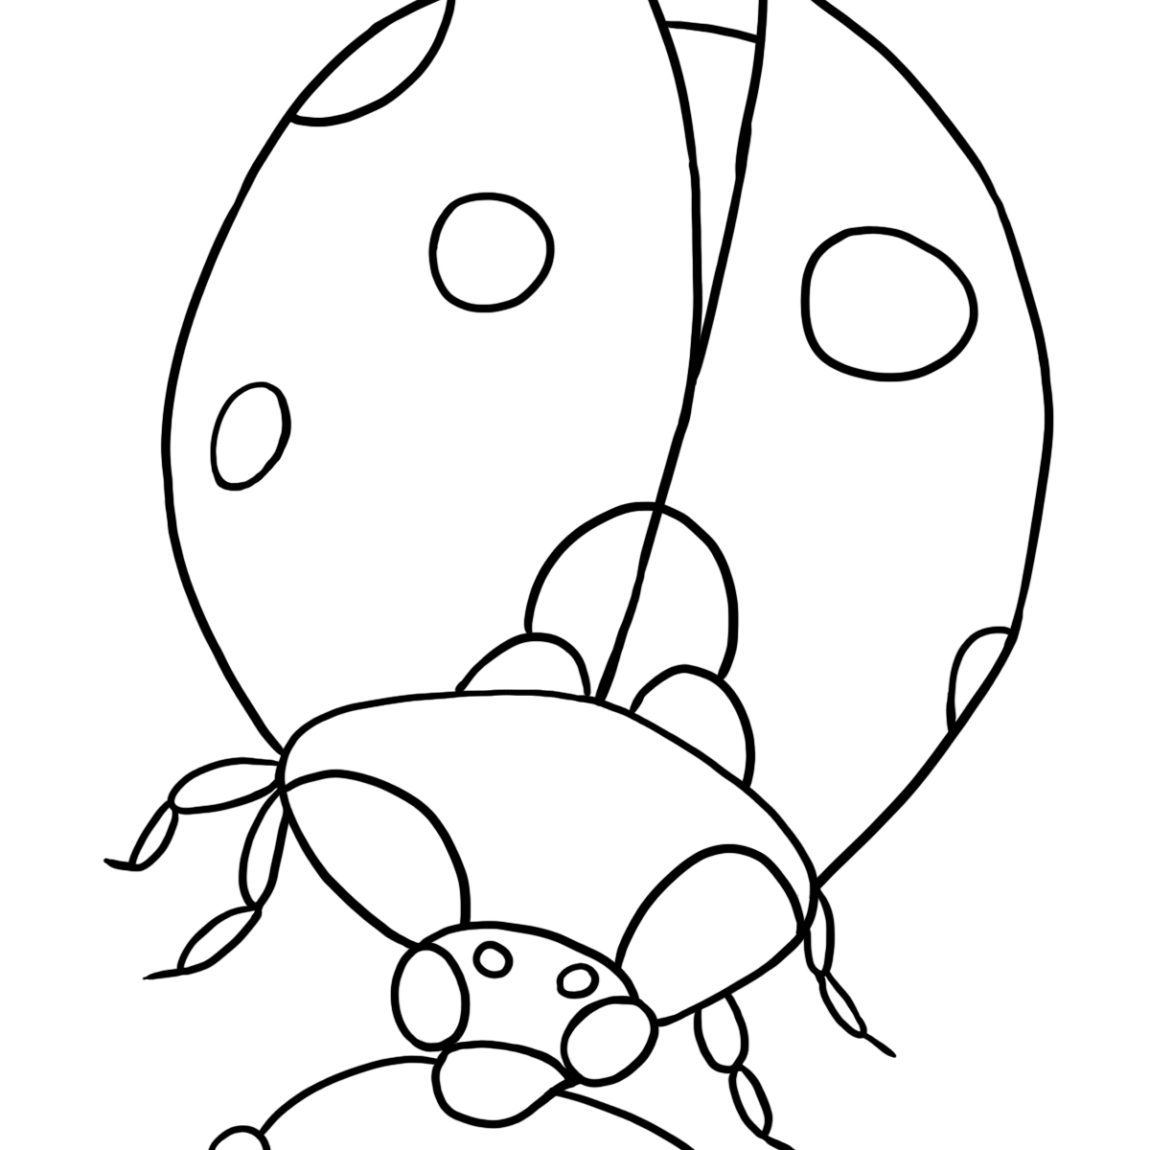 Free Ladybug Coloring Pages at GetColoringscom Free